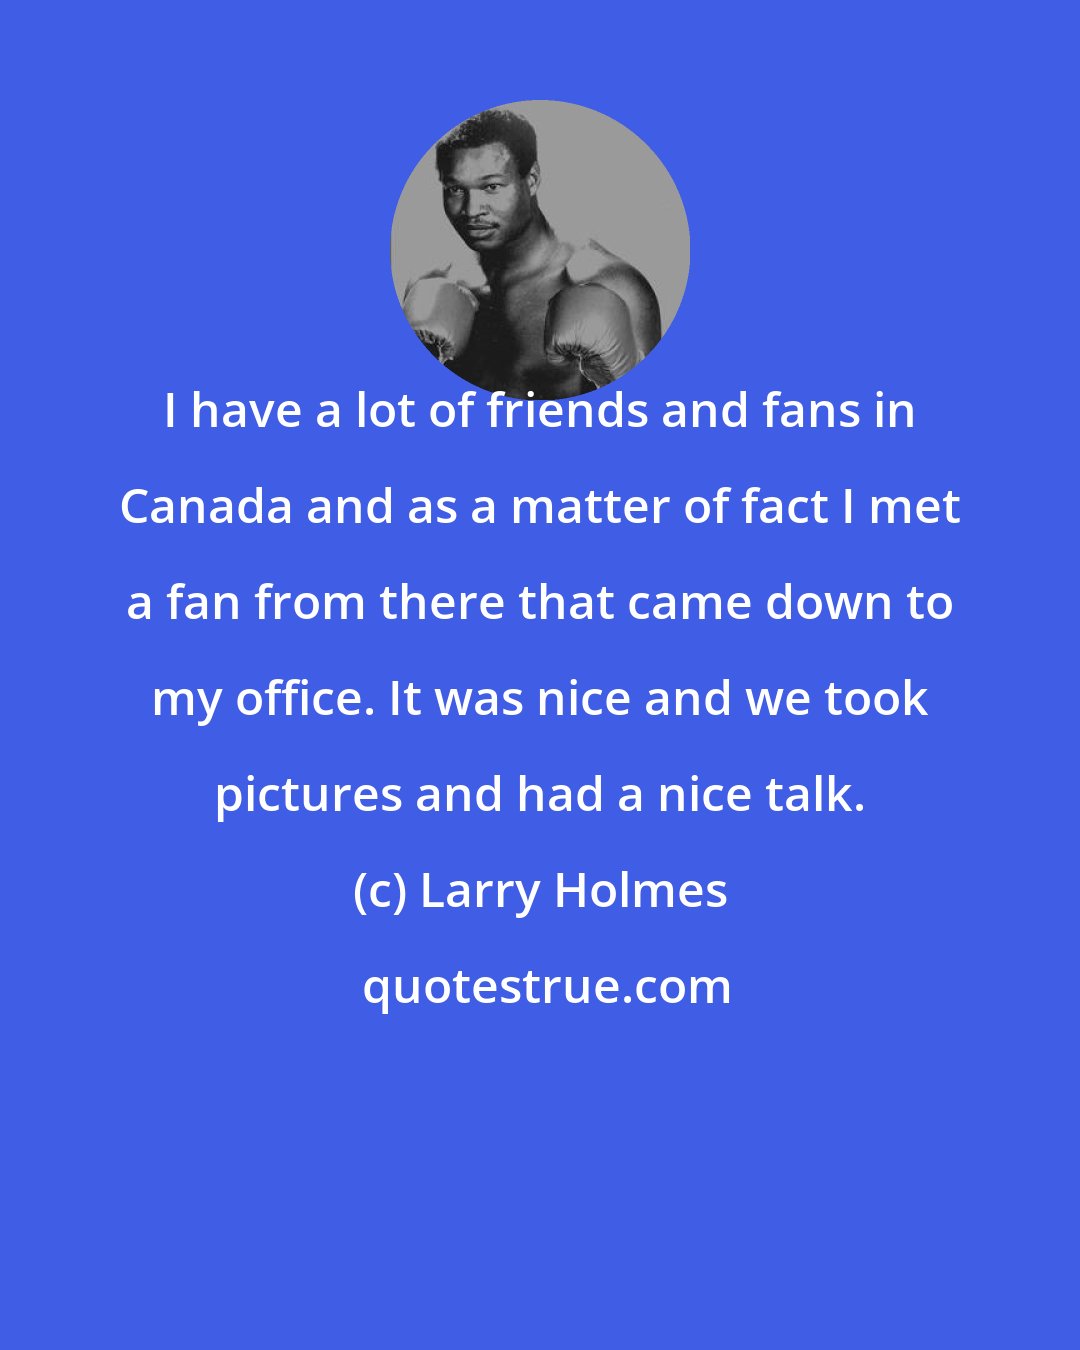 Larry Holmes: I have a lot of friends and fans in Canada and as a matter of fact I met a fan from there that came down to my office. It was nice and we took pictures and had a nice talk.